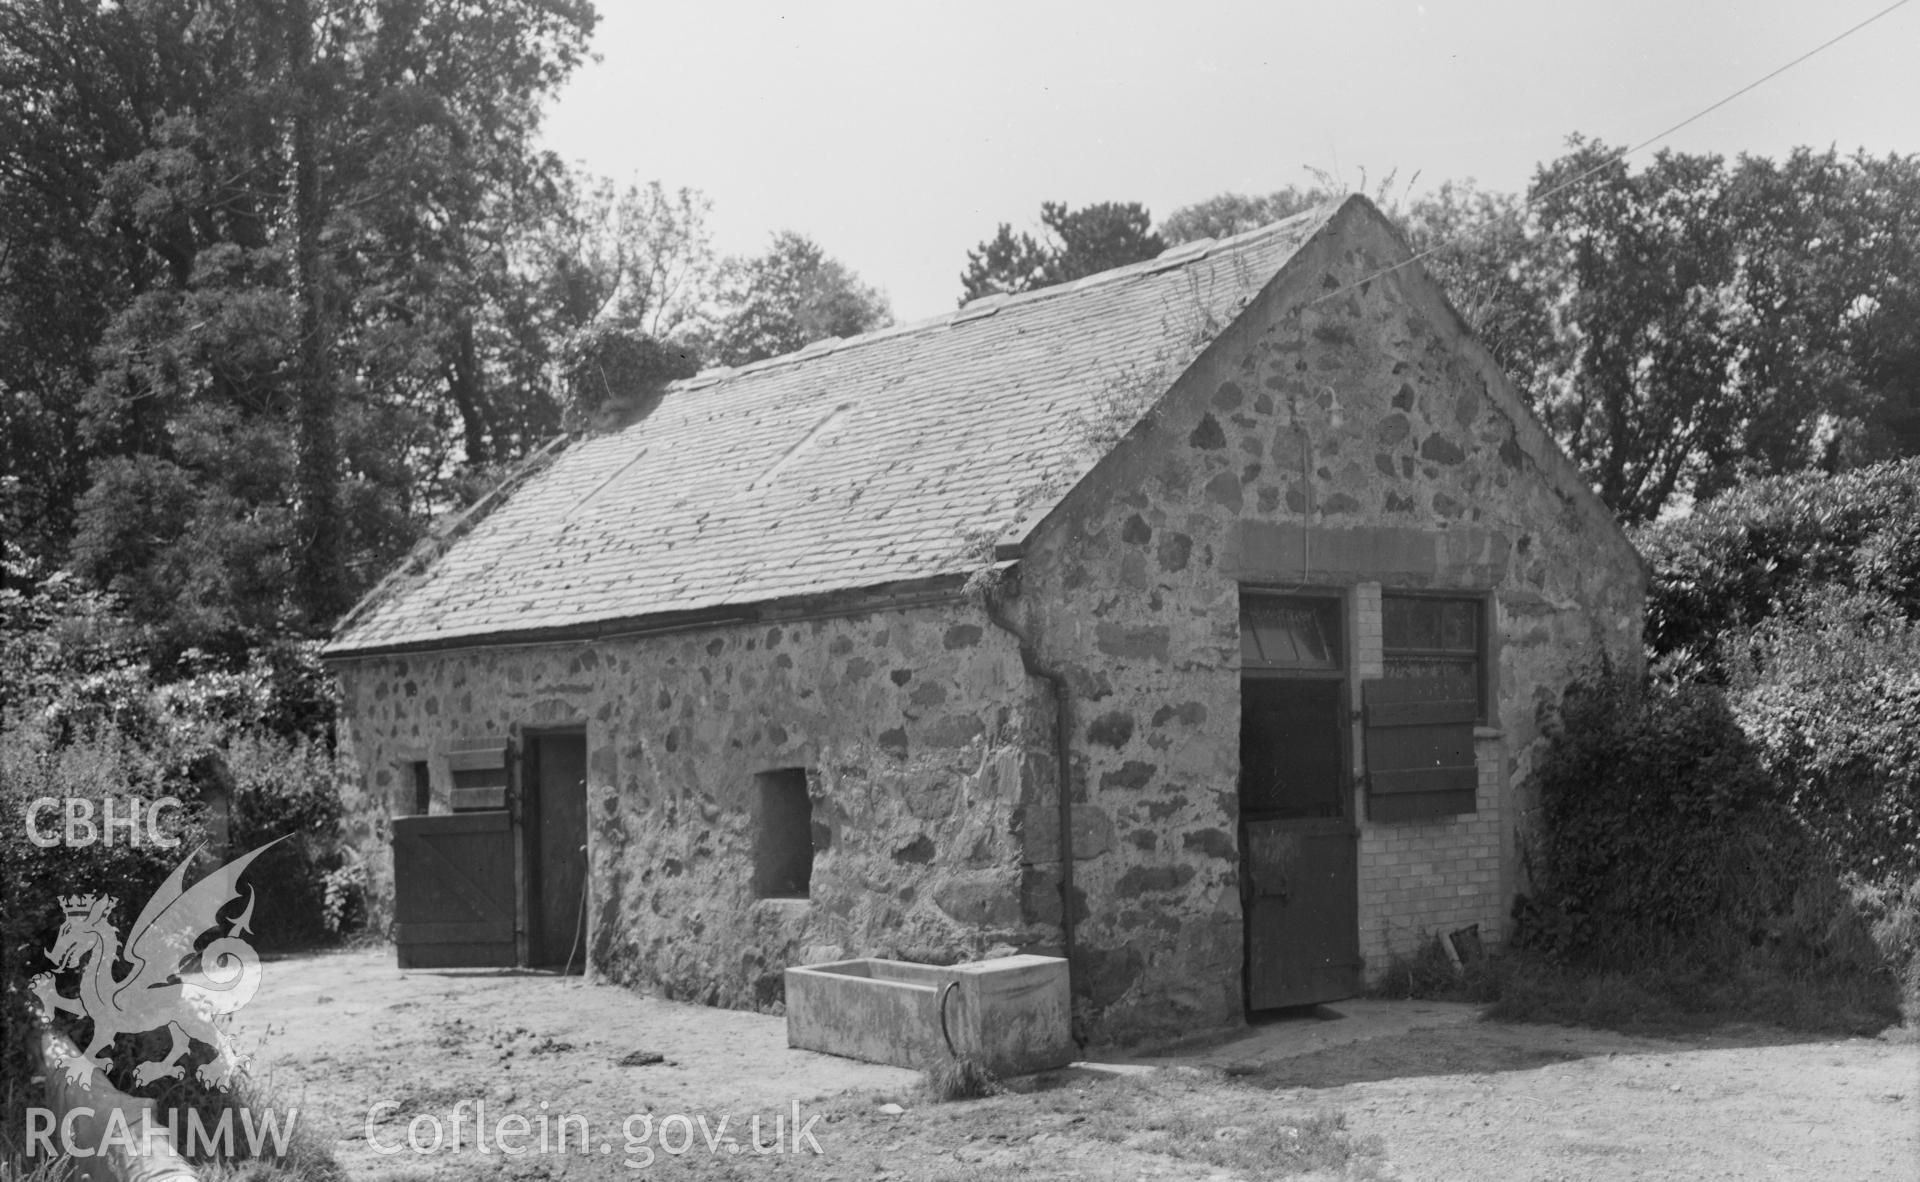 Black and white nitrate negative showing exterior view of Rhyllech.